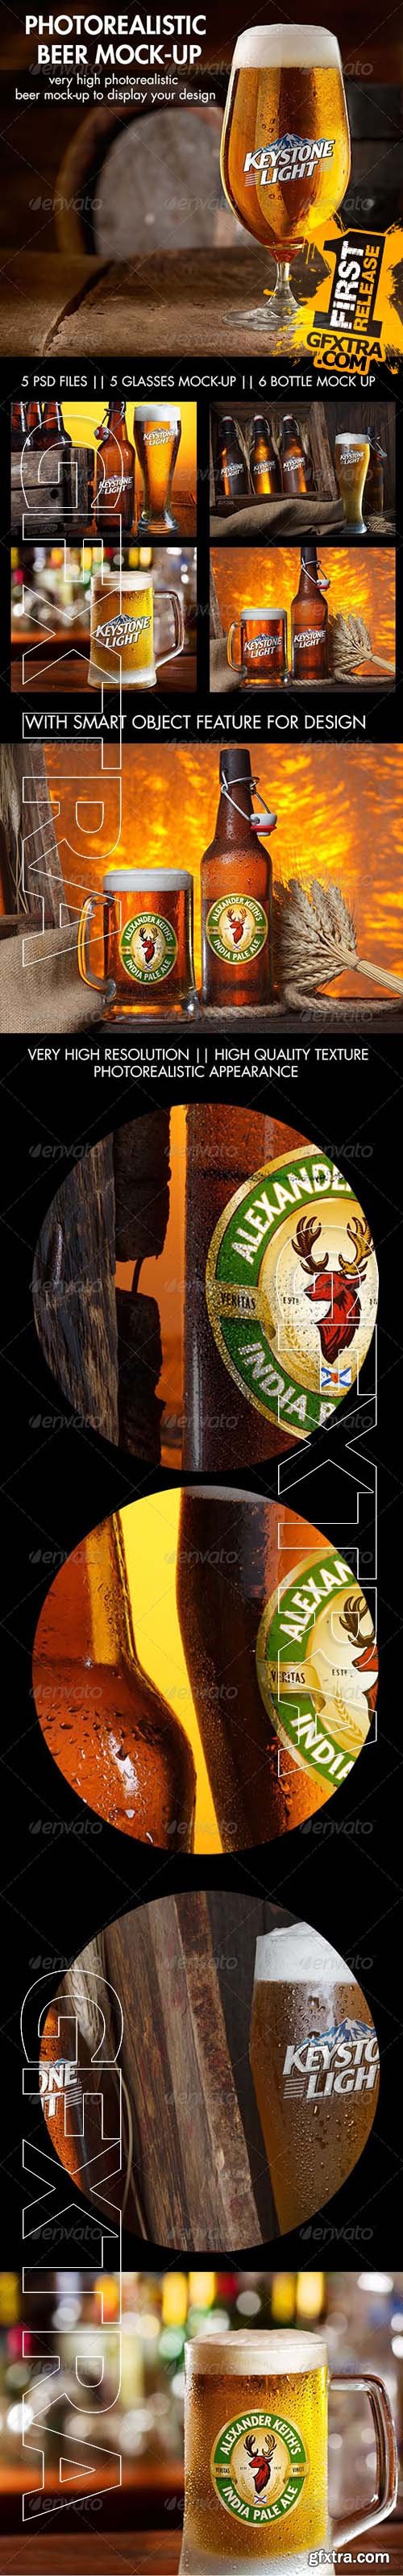 Photorealistic Beer Mock-Up - Graphicriver 8734200